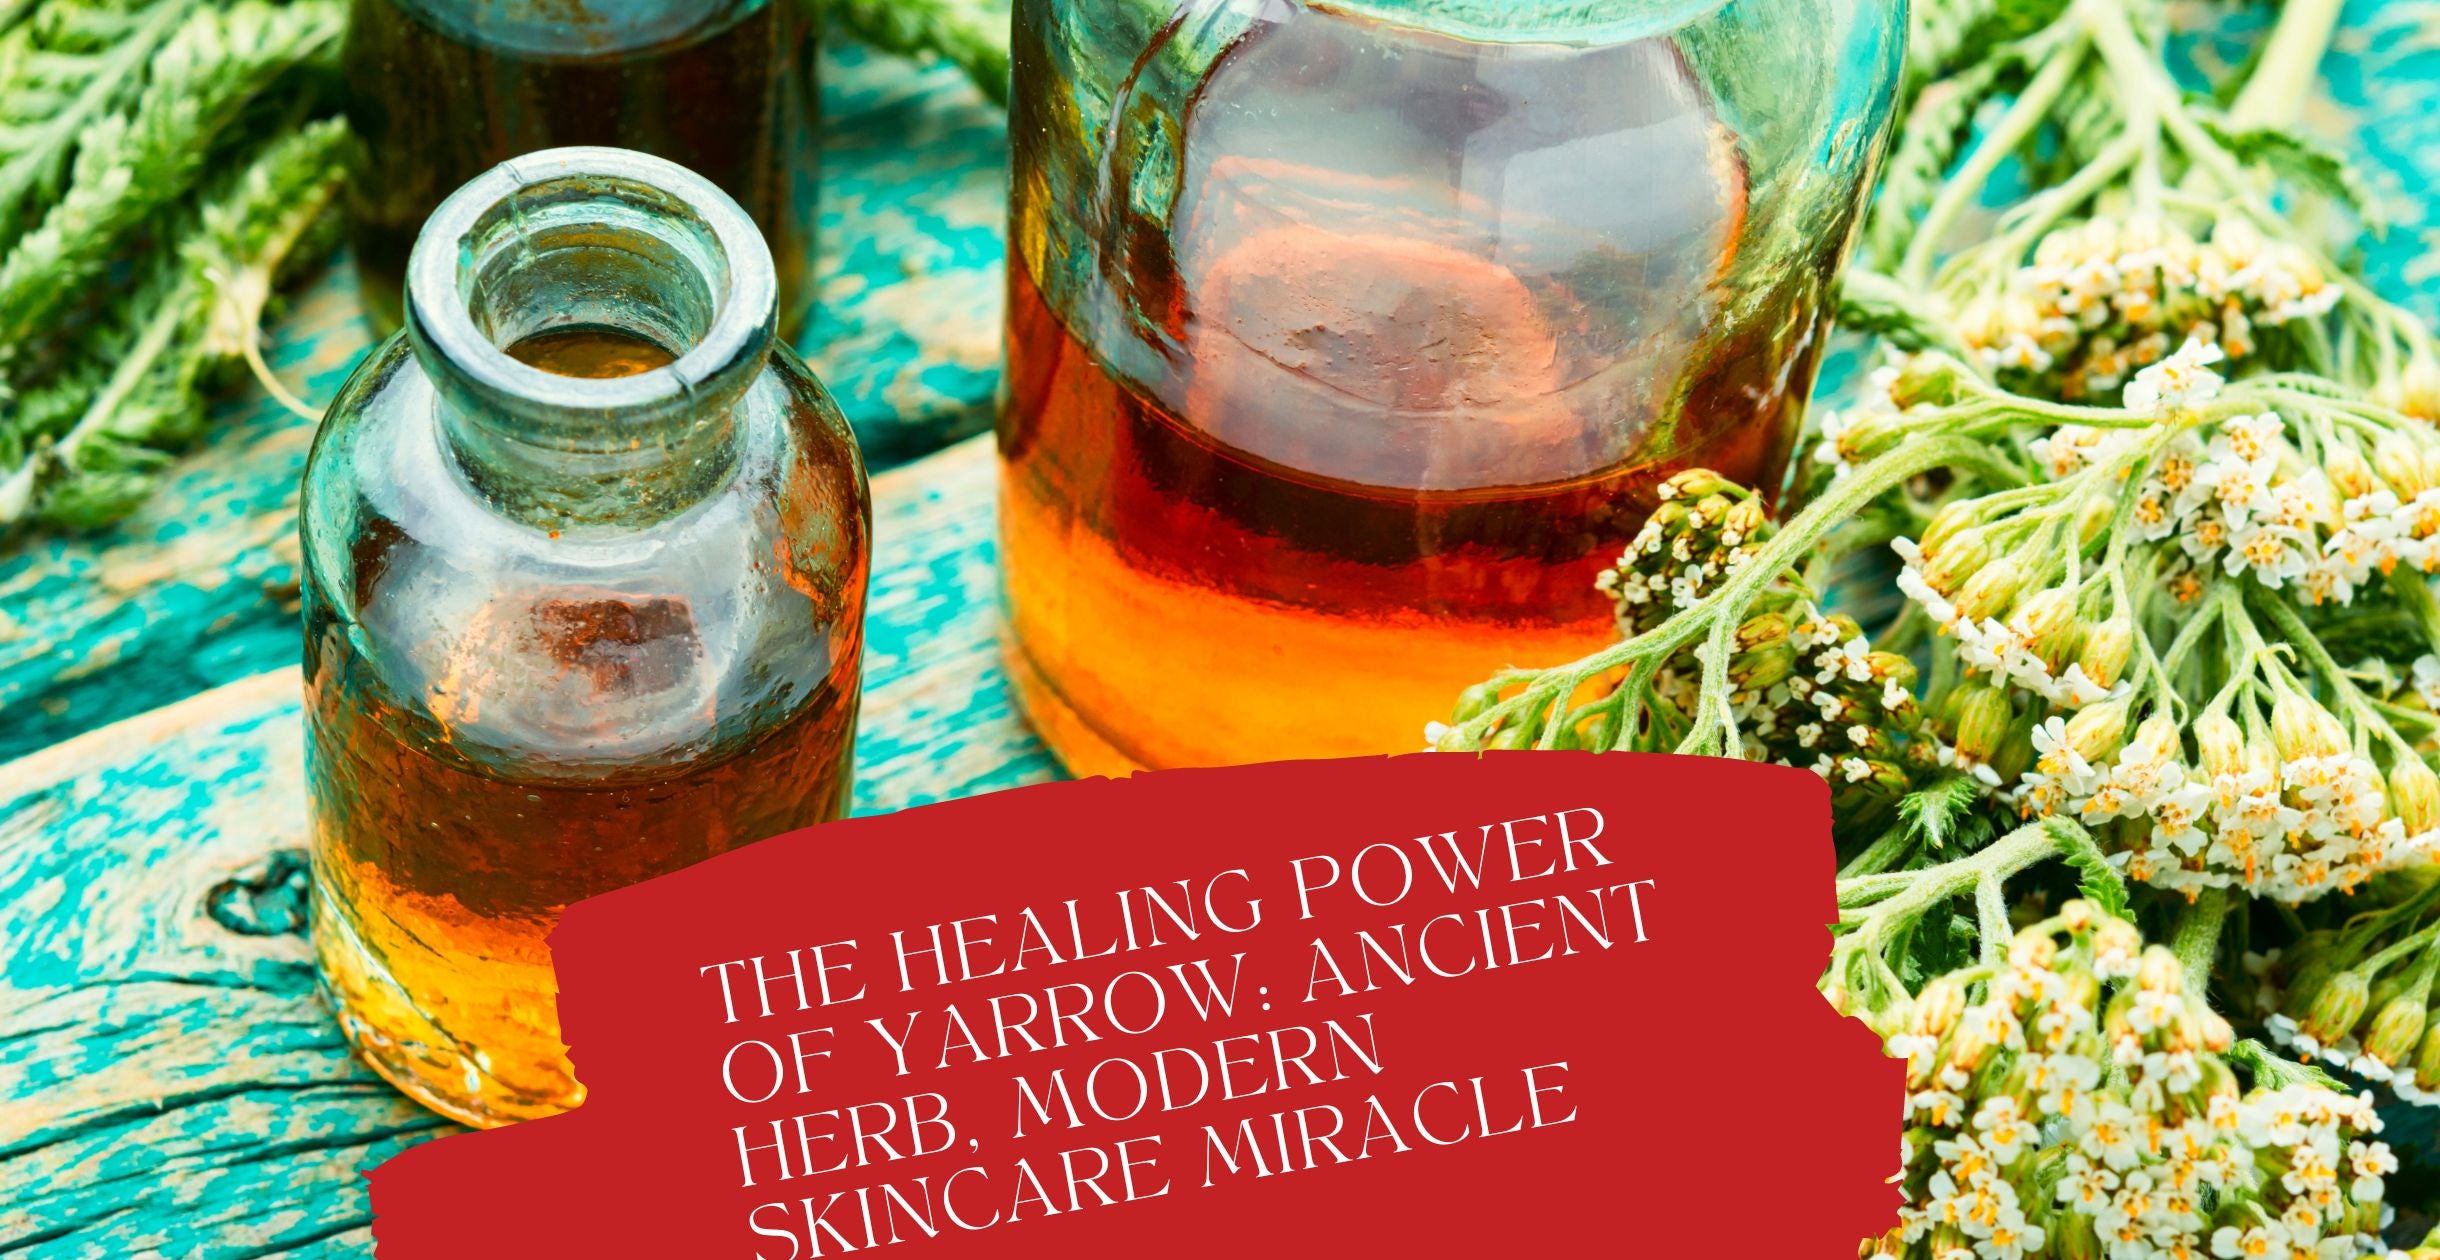 The Healing Power of Yarrow: Ancient Herb, Modern Skincare Miracle